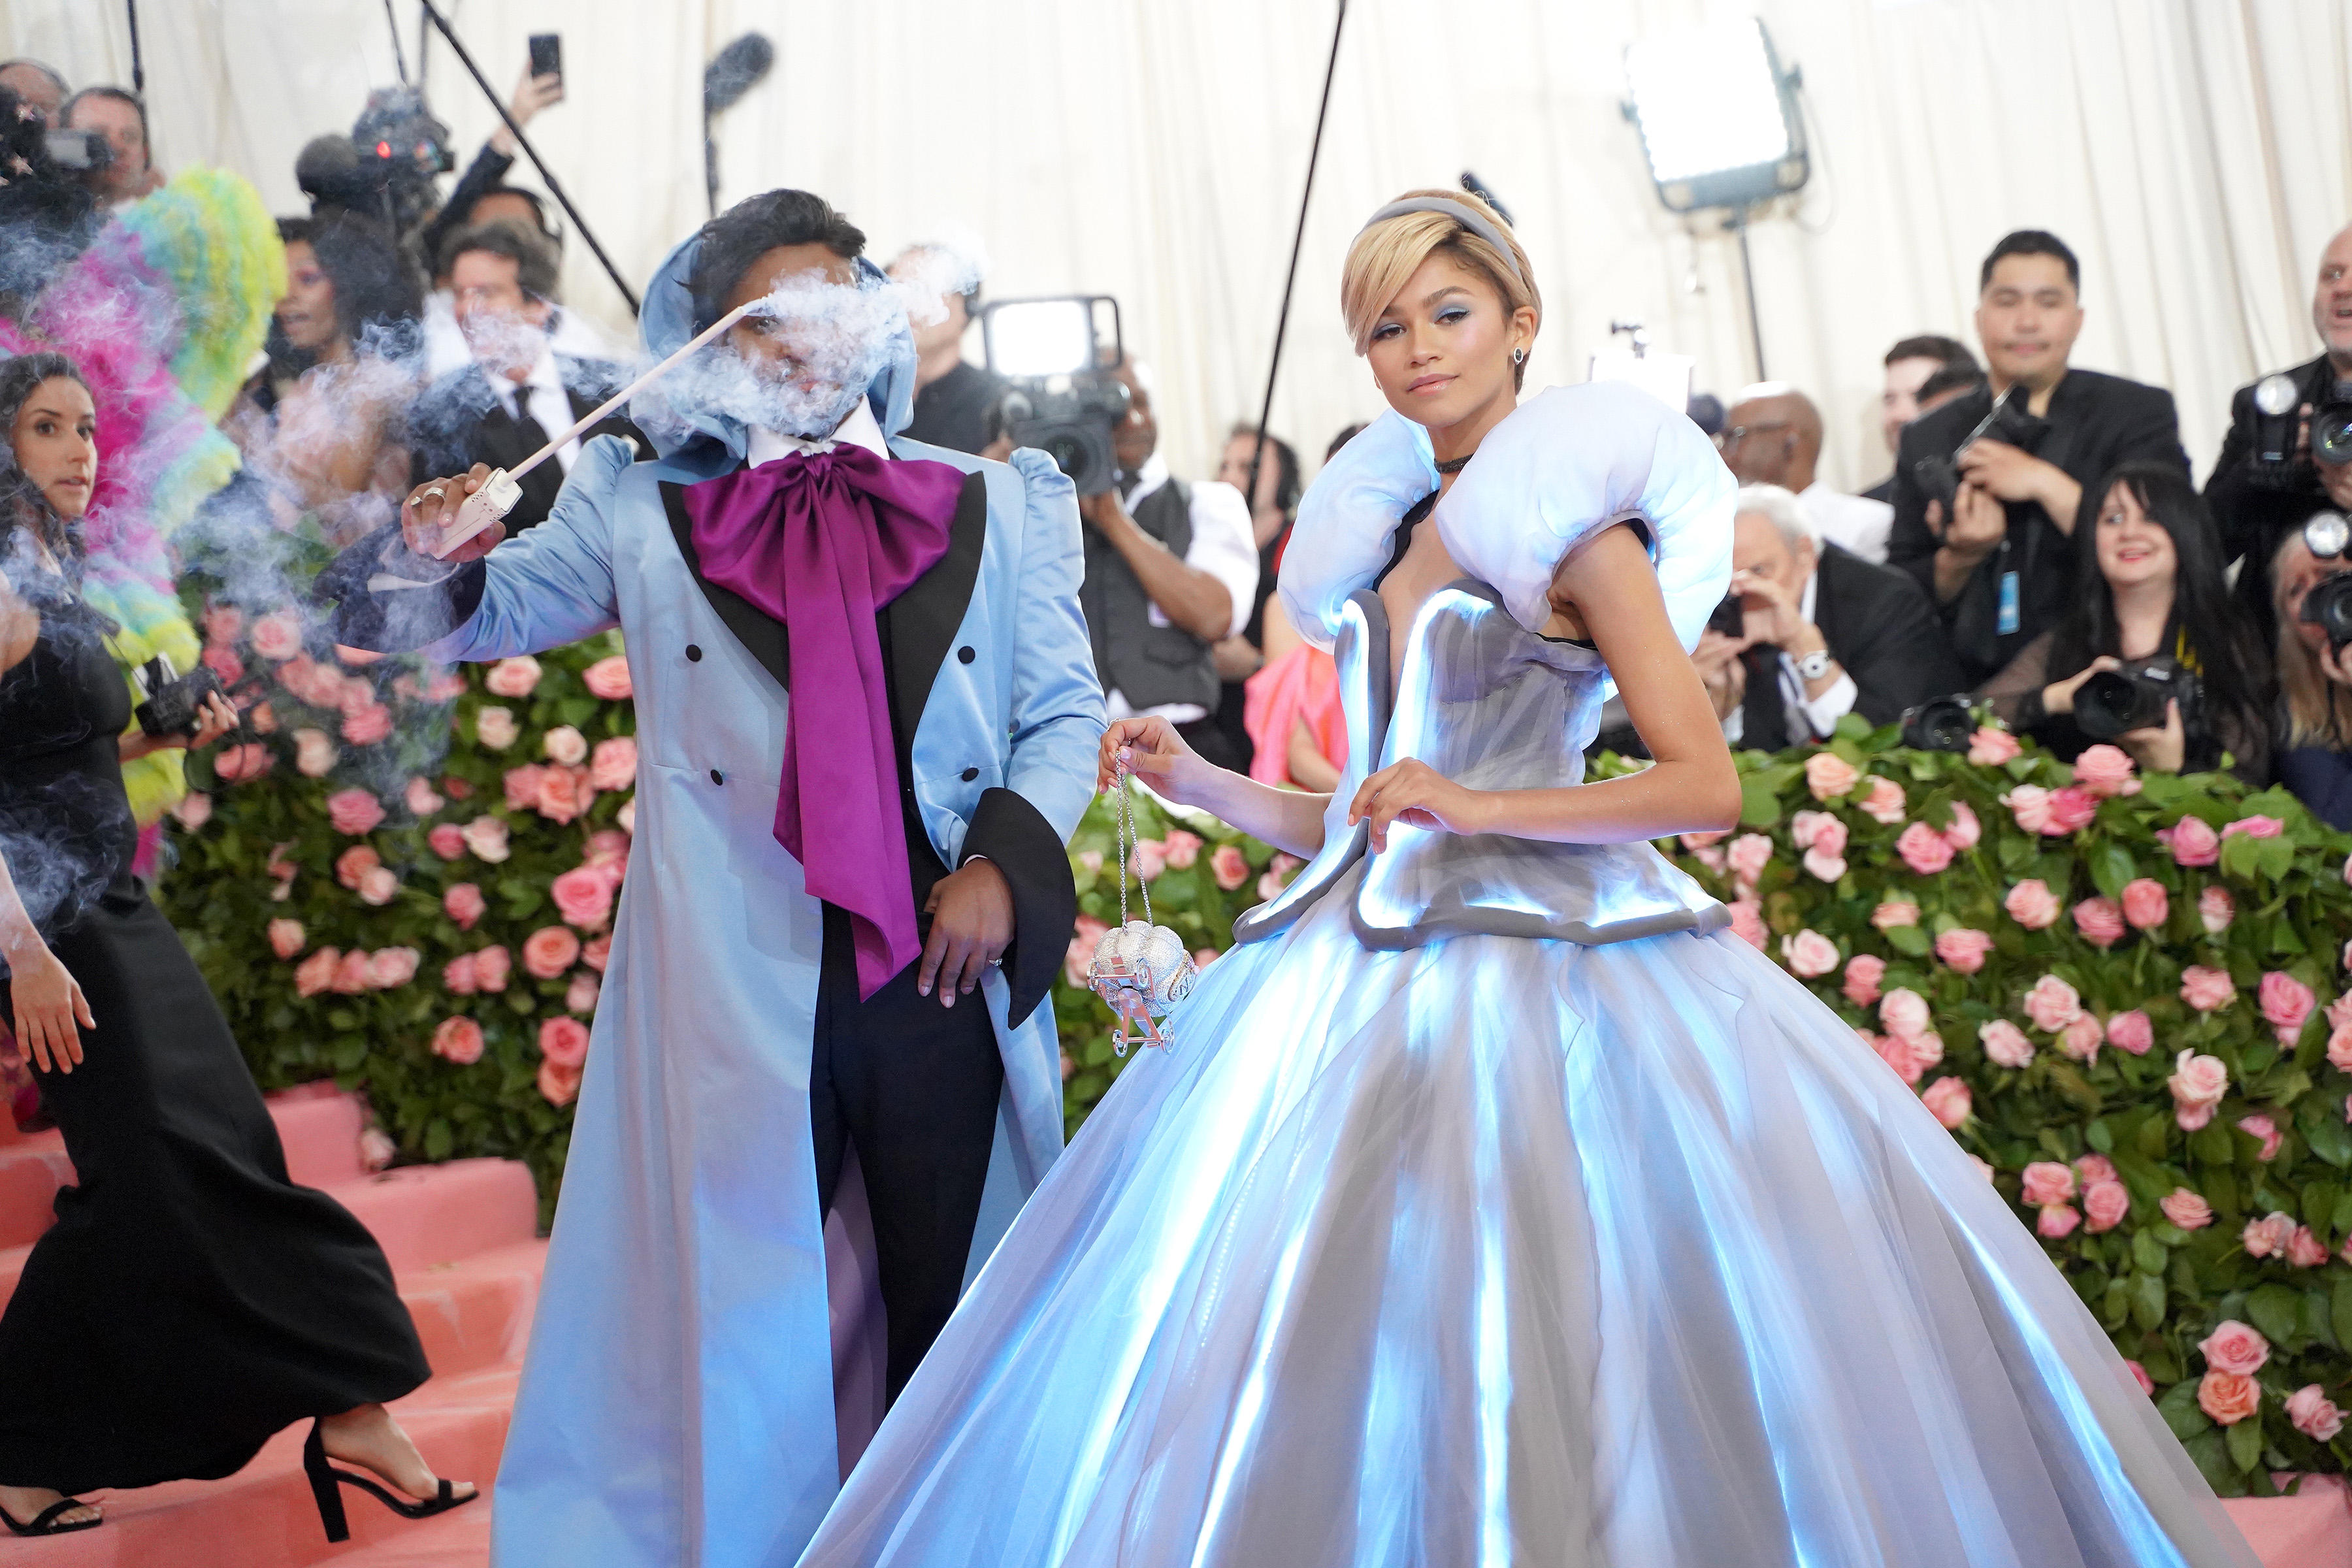 29 iconic met gala looks from the best-dressed guests since 1973